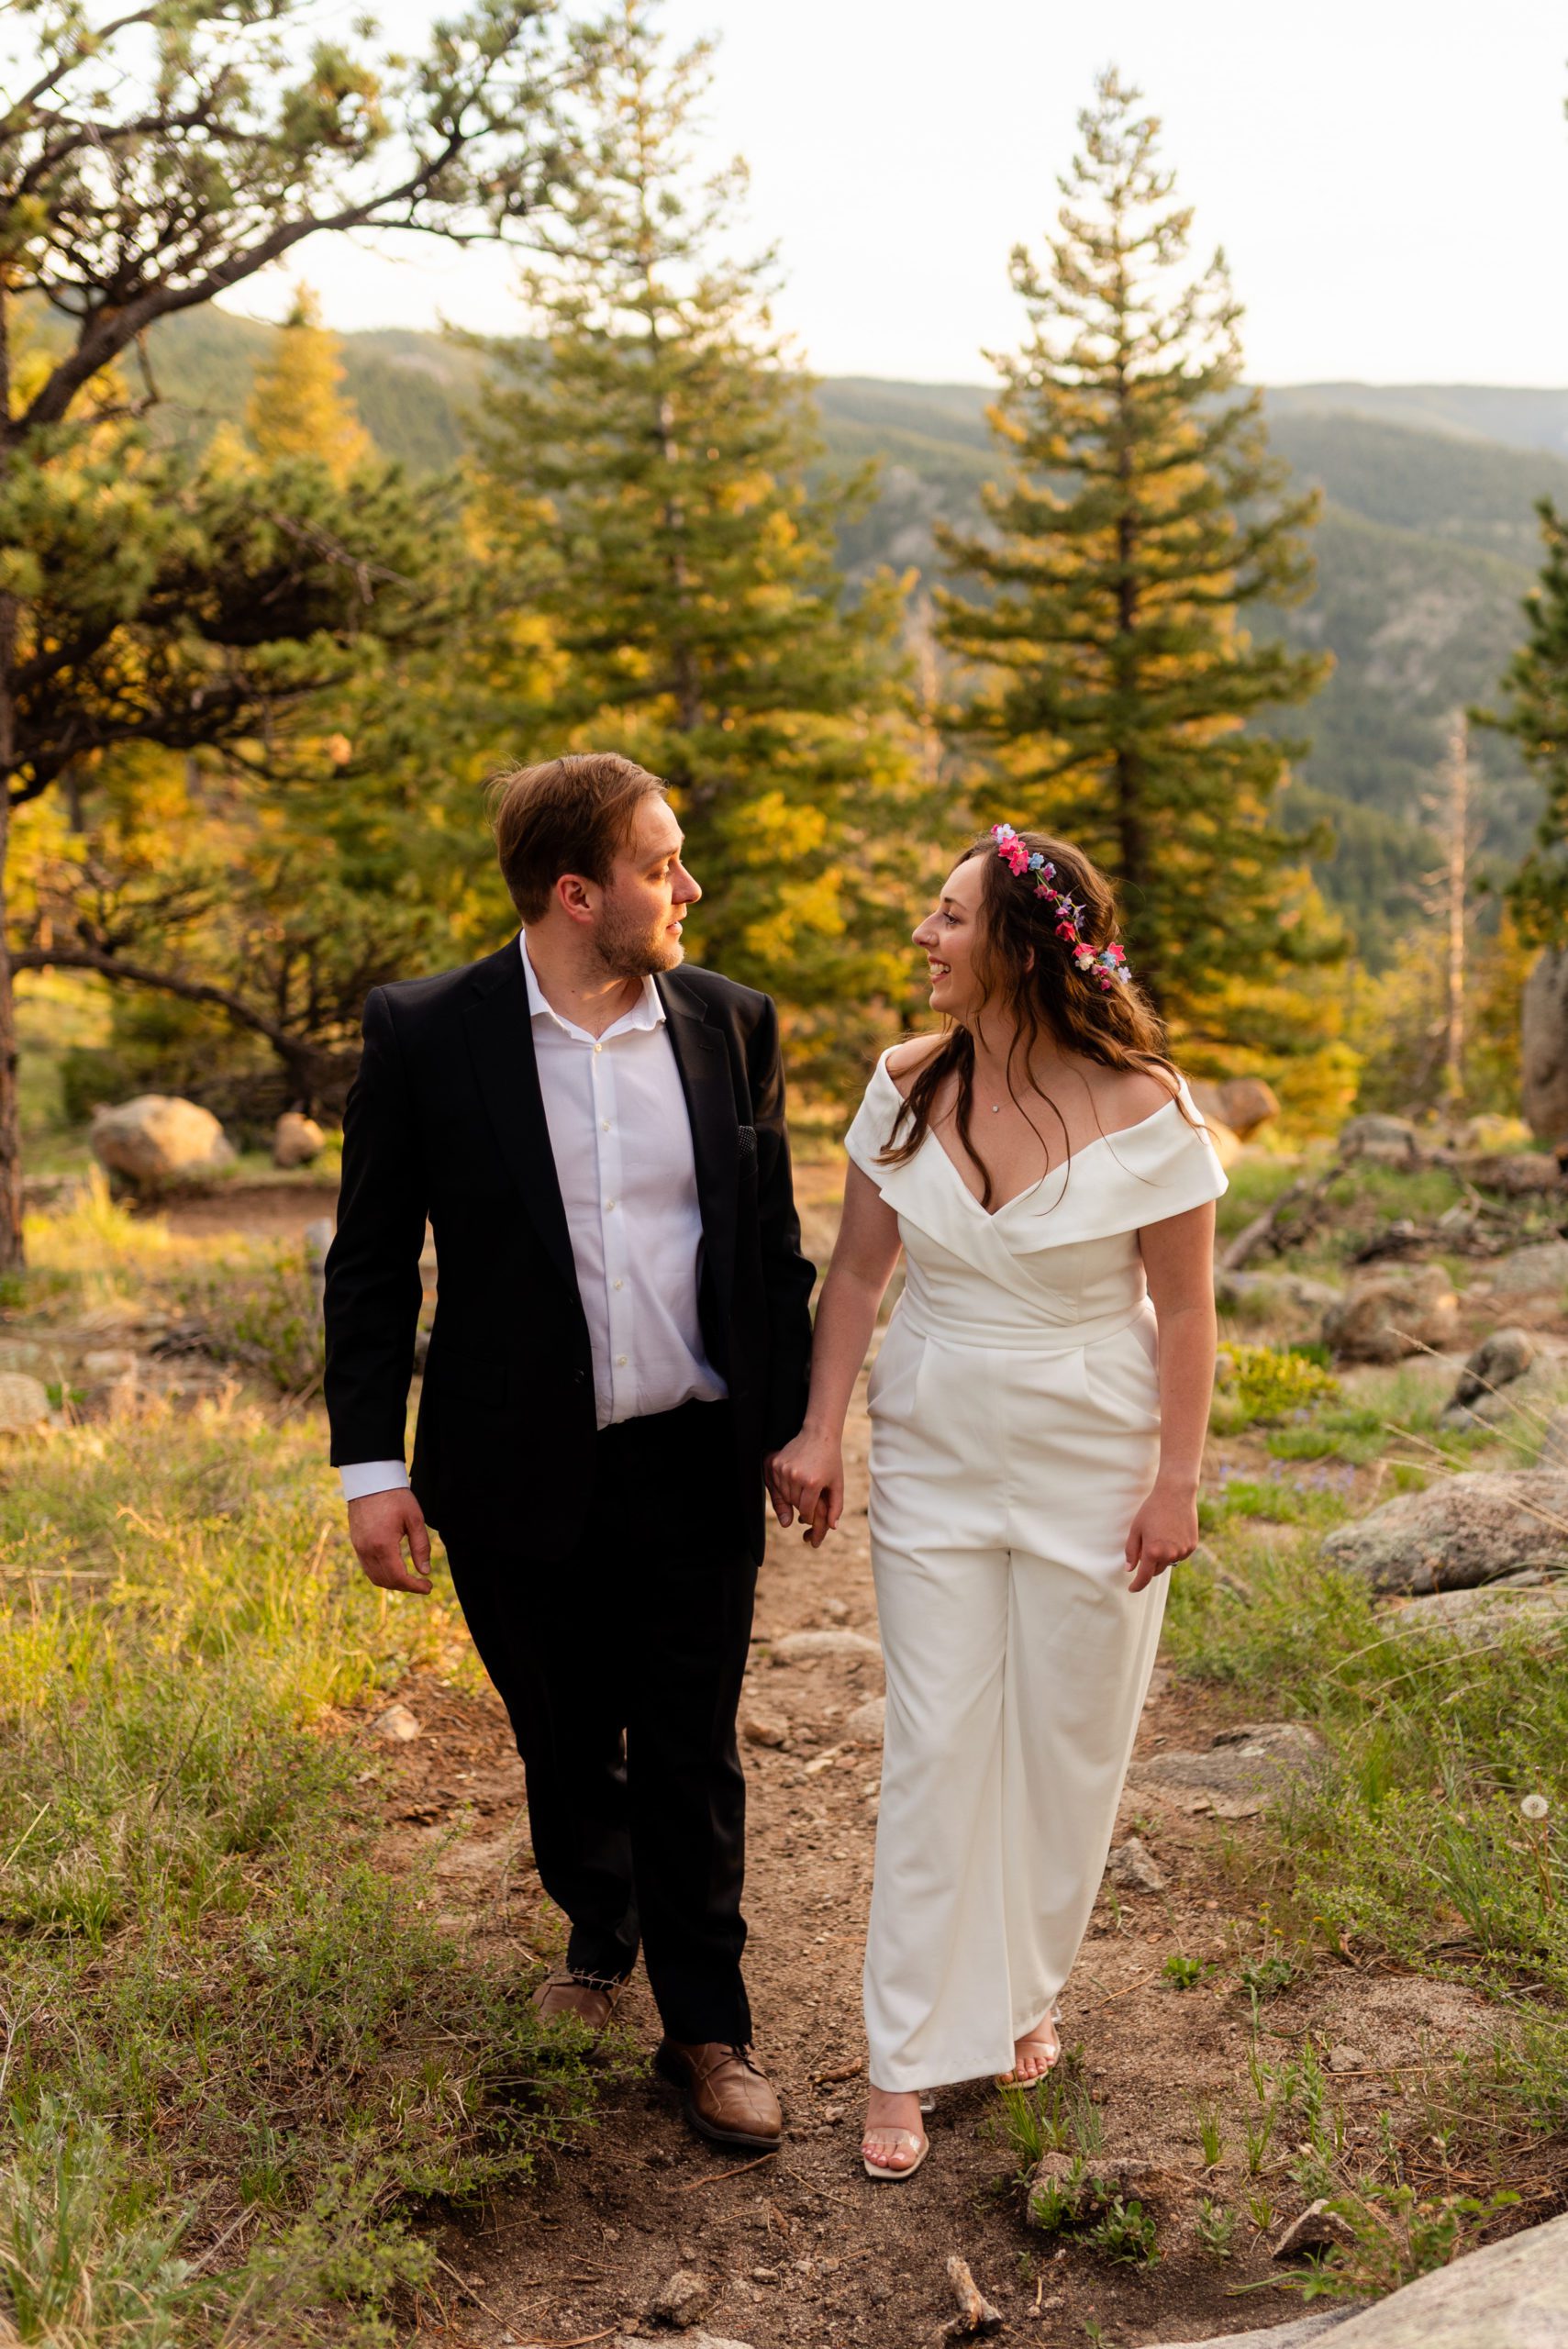 The bride and groom hand in hand walking together and smiling at each other during their Boulder Hiking elopement near Realization point. 